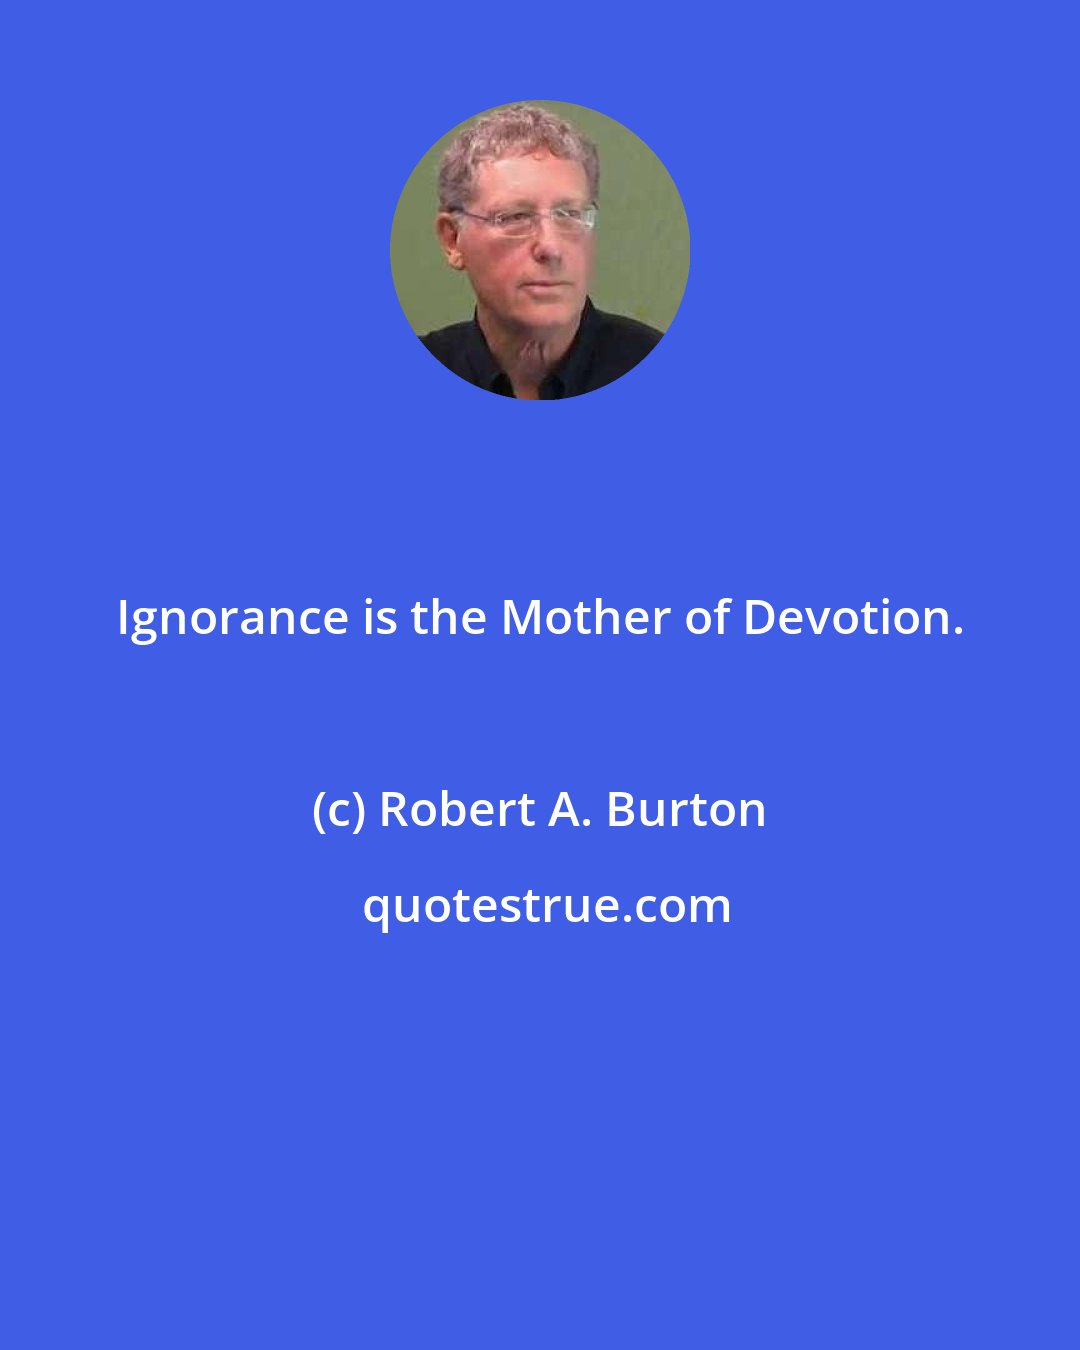 Robert A. Burton: Ignorance is the Mother of Devotion.